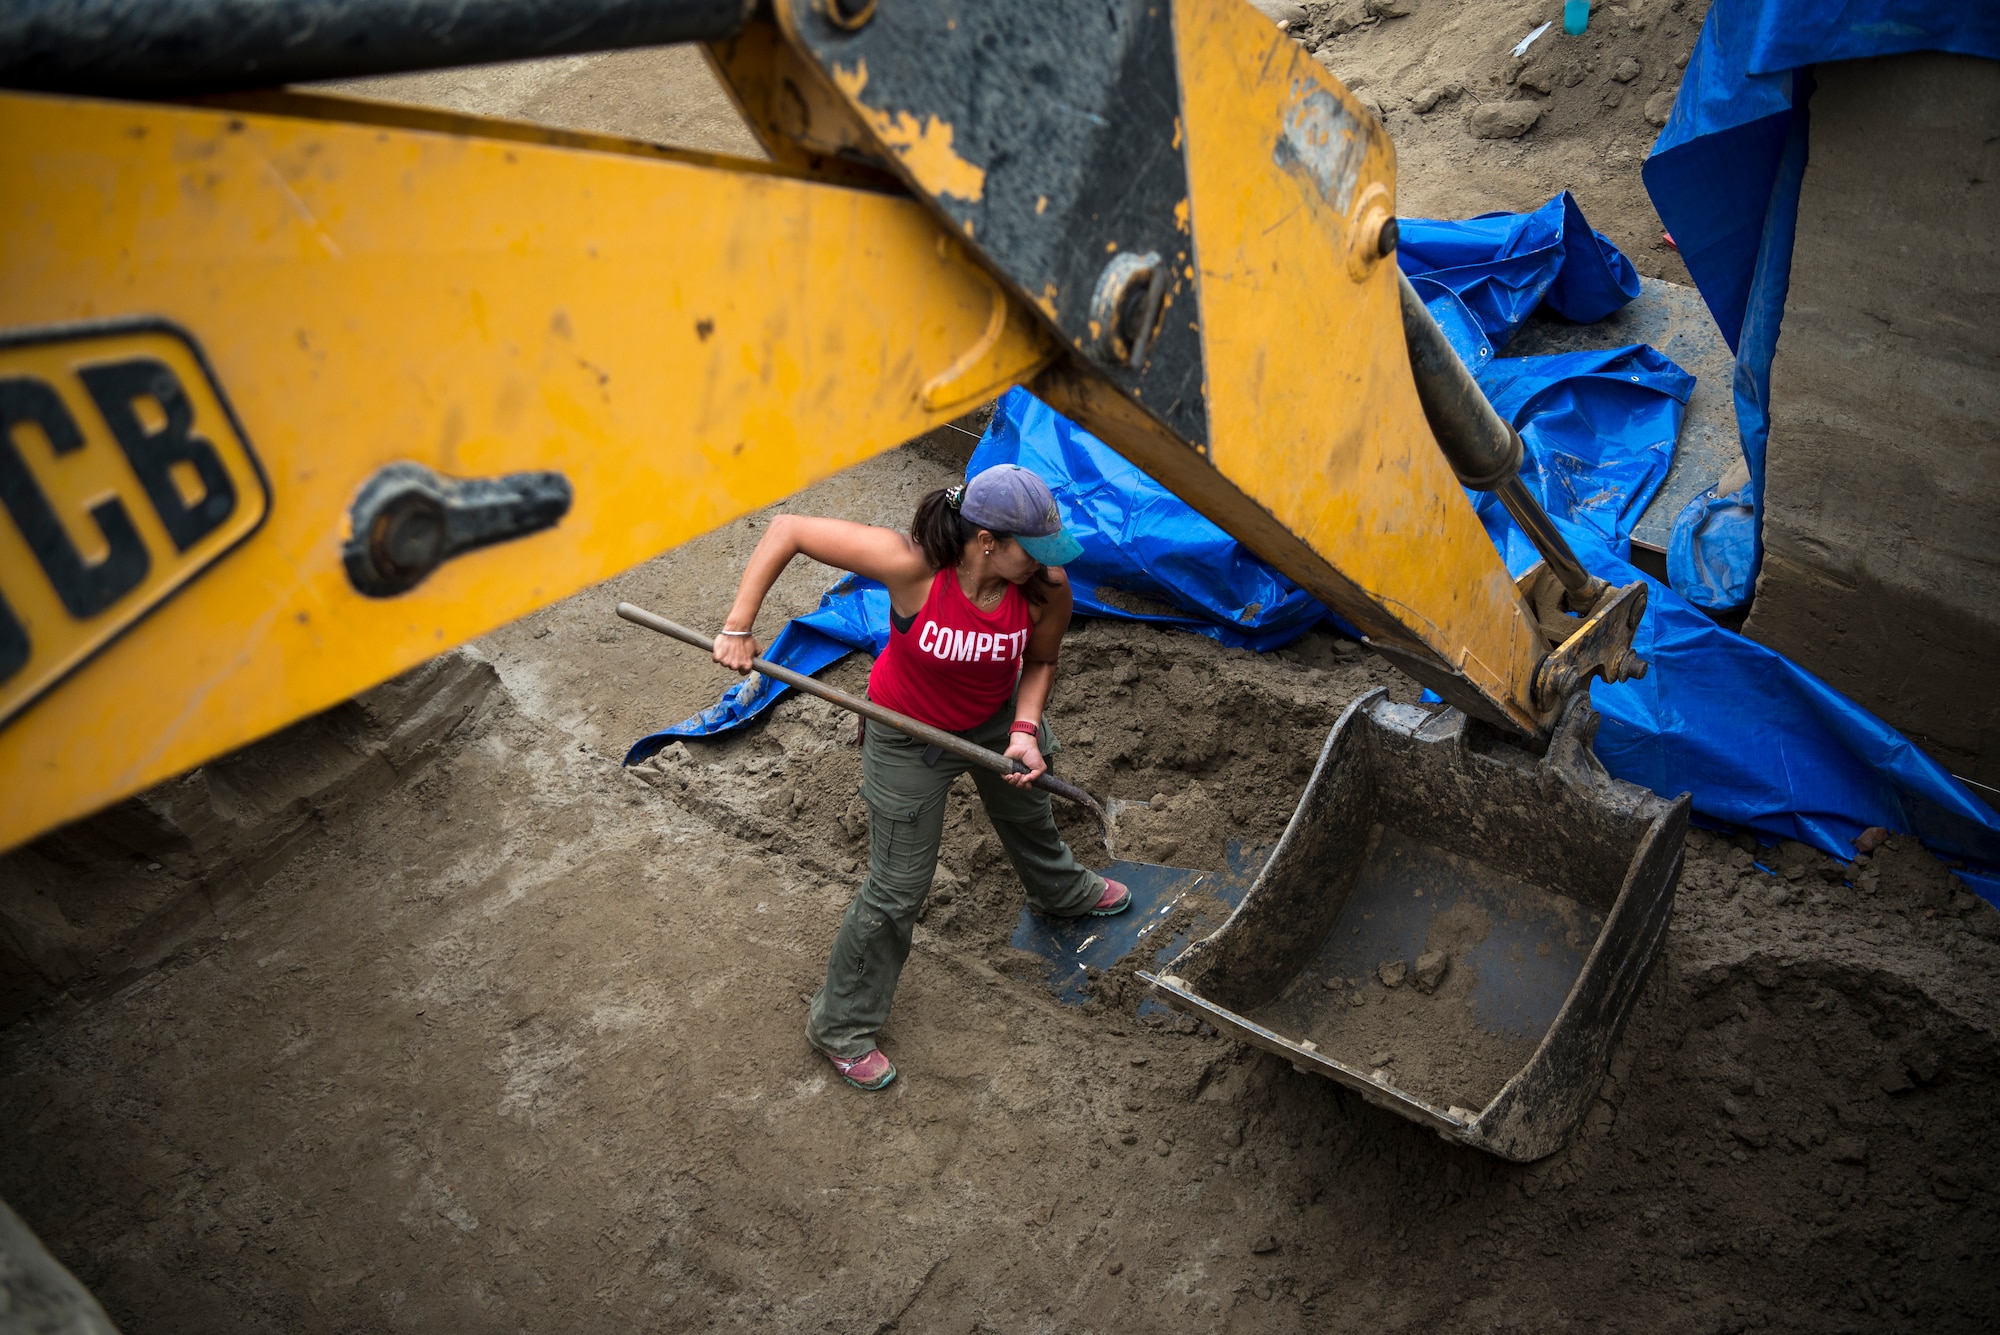 Dr. Meghan-Tomasita Cosgriff-Hernandez, a forensic anthropologist with the Defense POW/MIA Accounting Agency (DPAA), assists with excavation operations while looking for possible human remains from WWII, March 6, 2019.